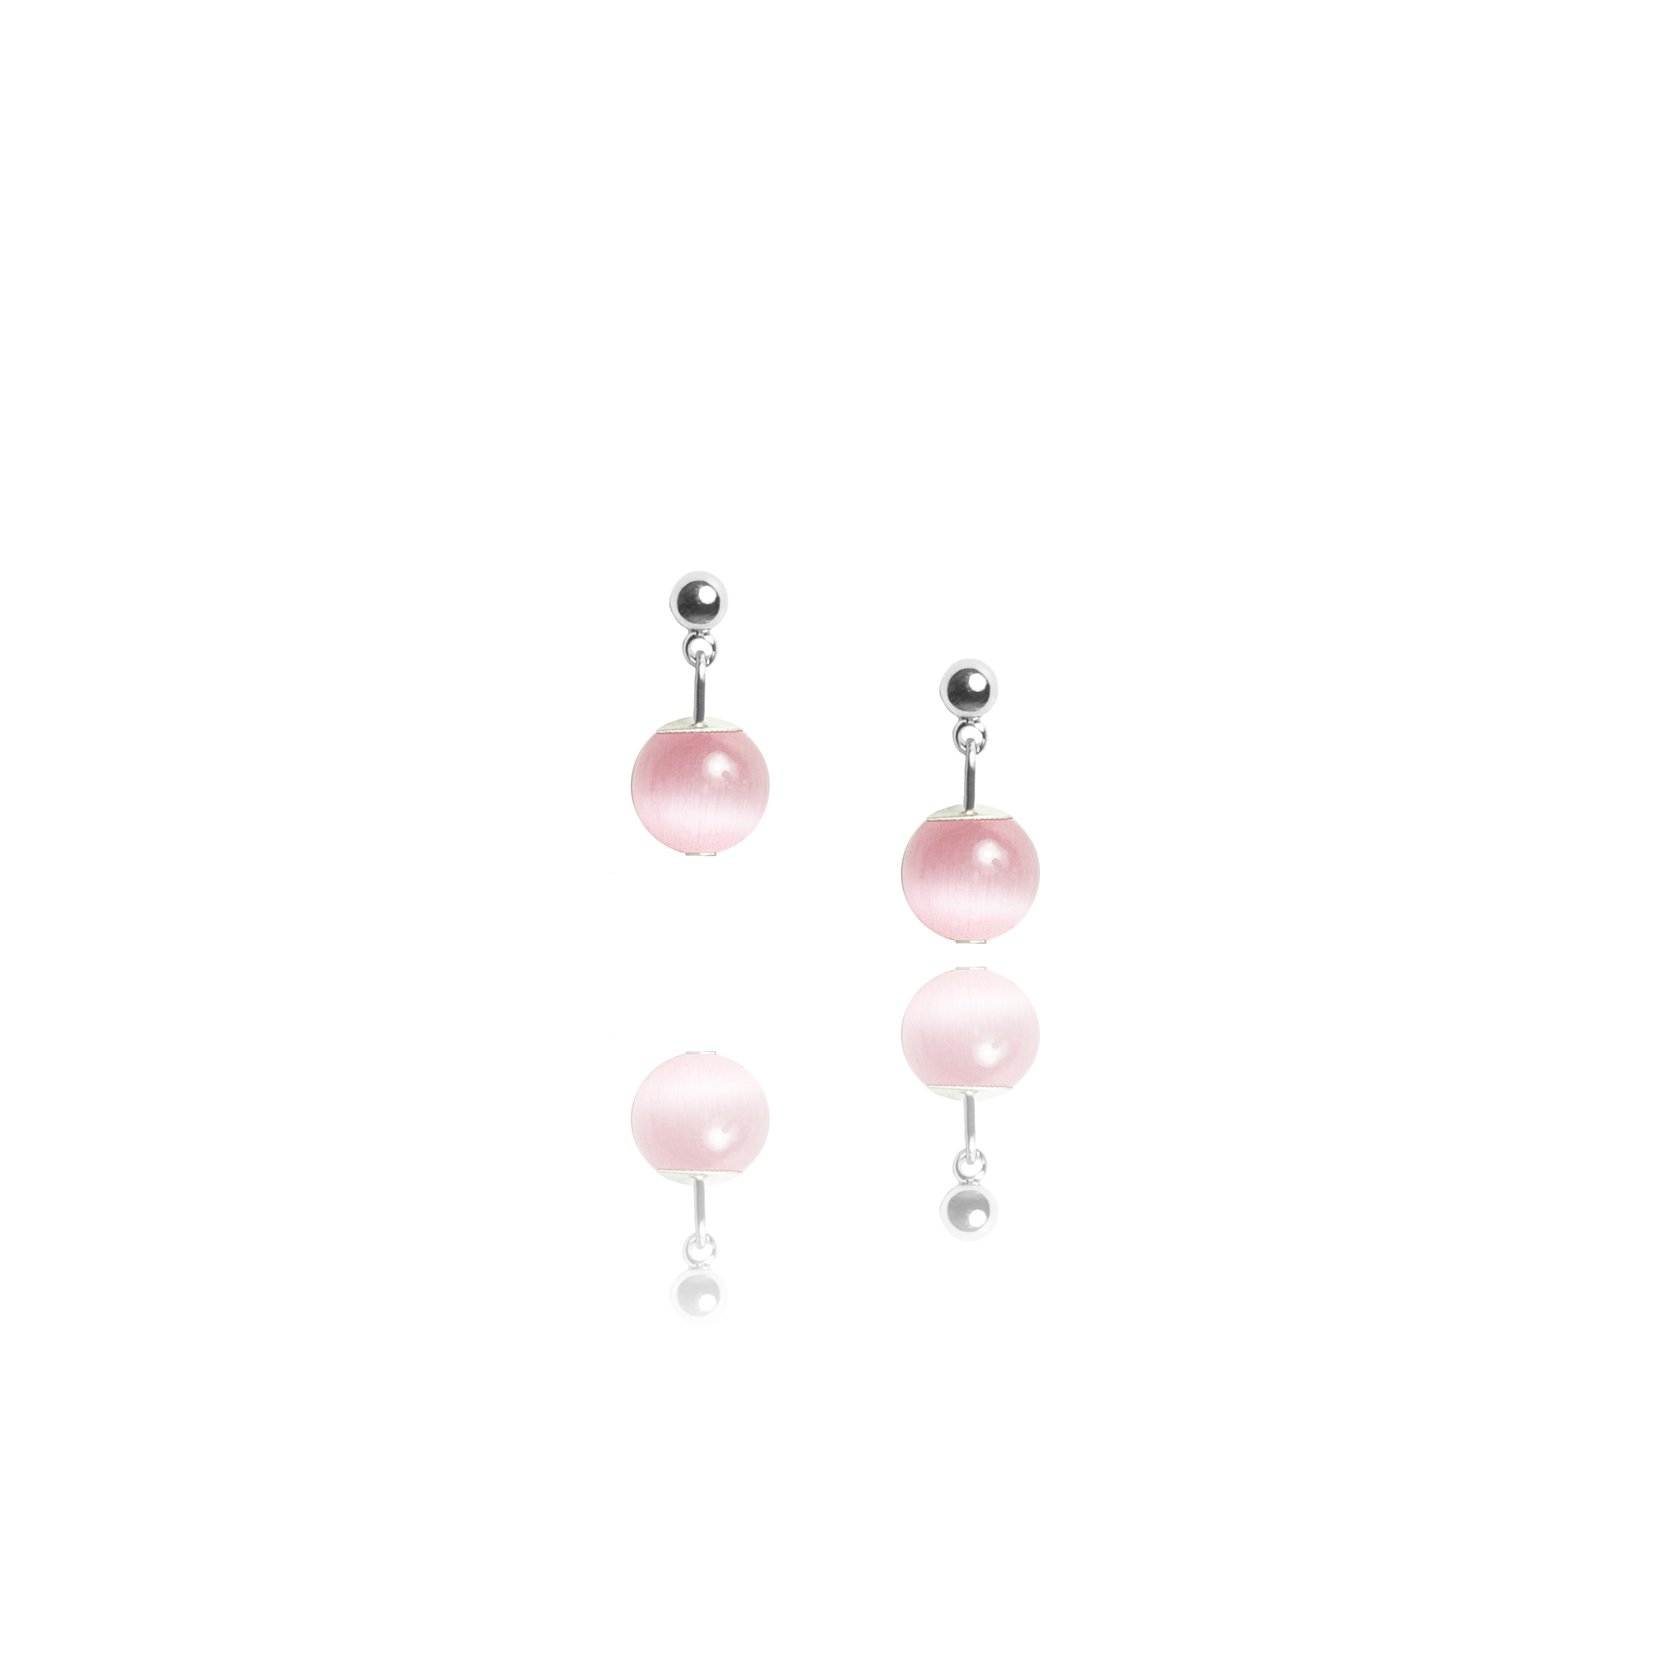 Small stud earrings with a pink stone.